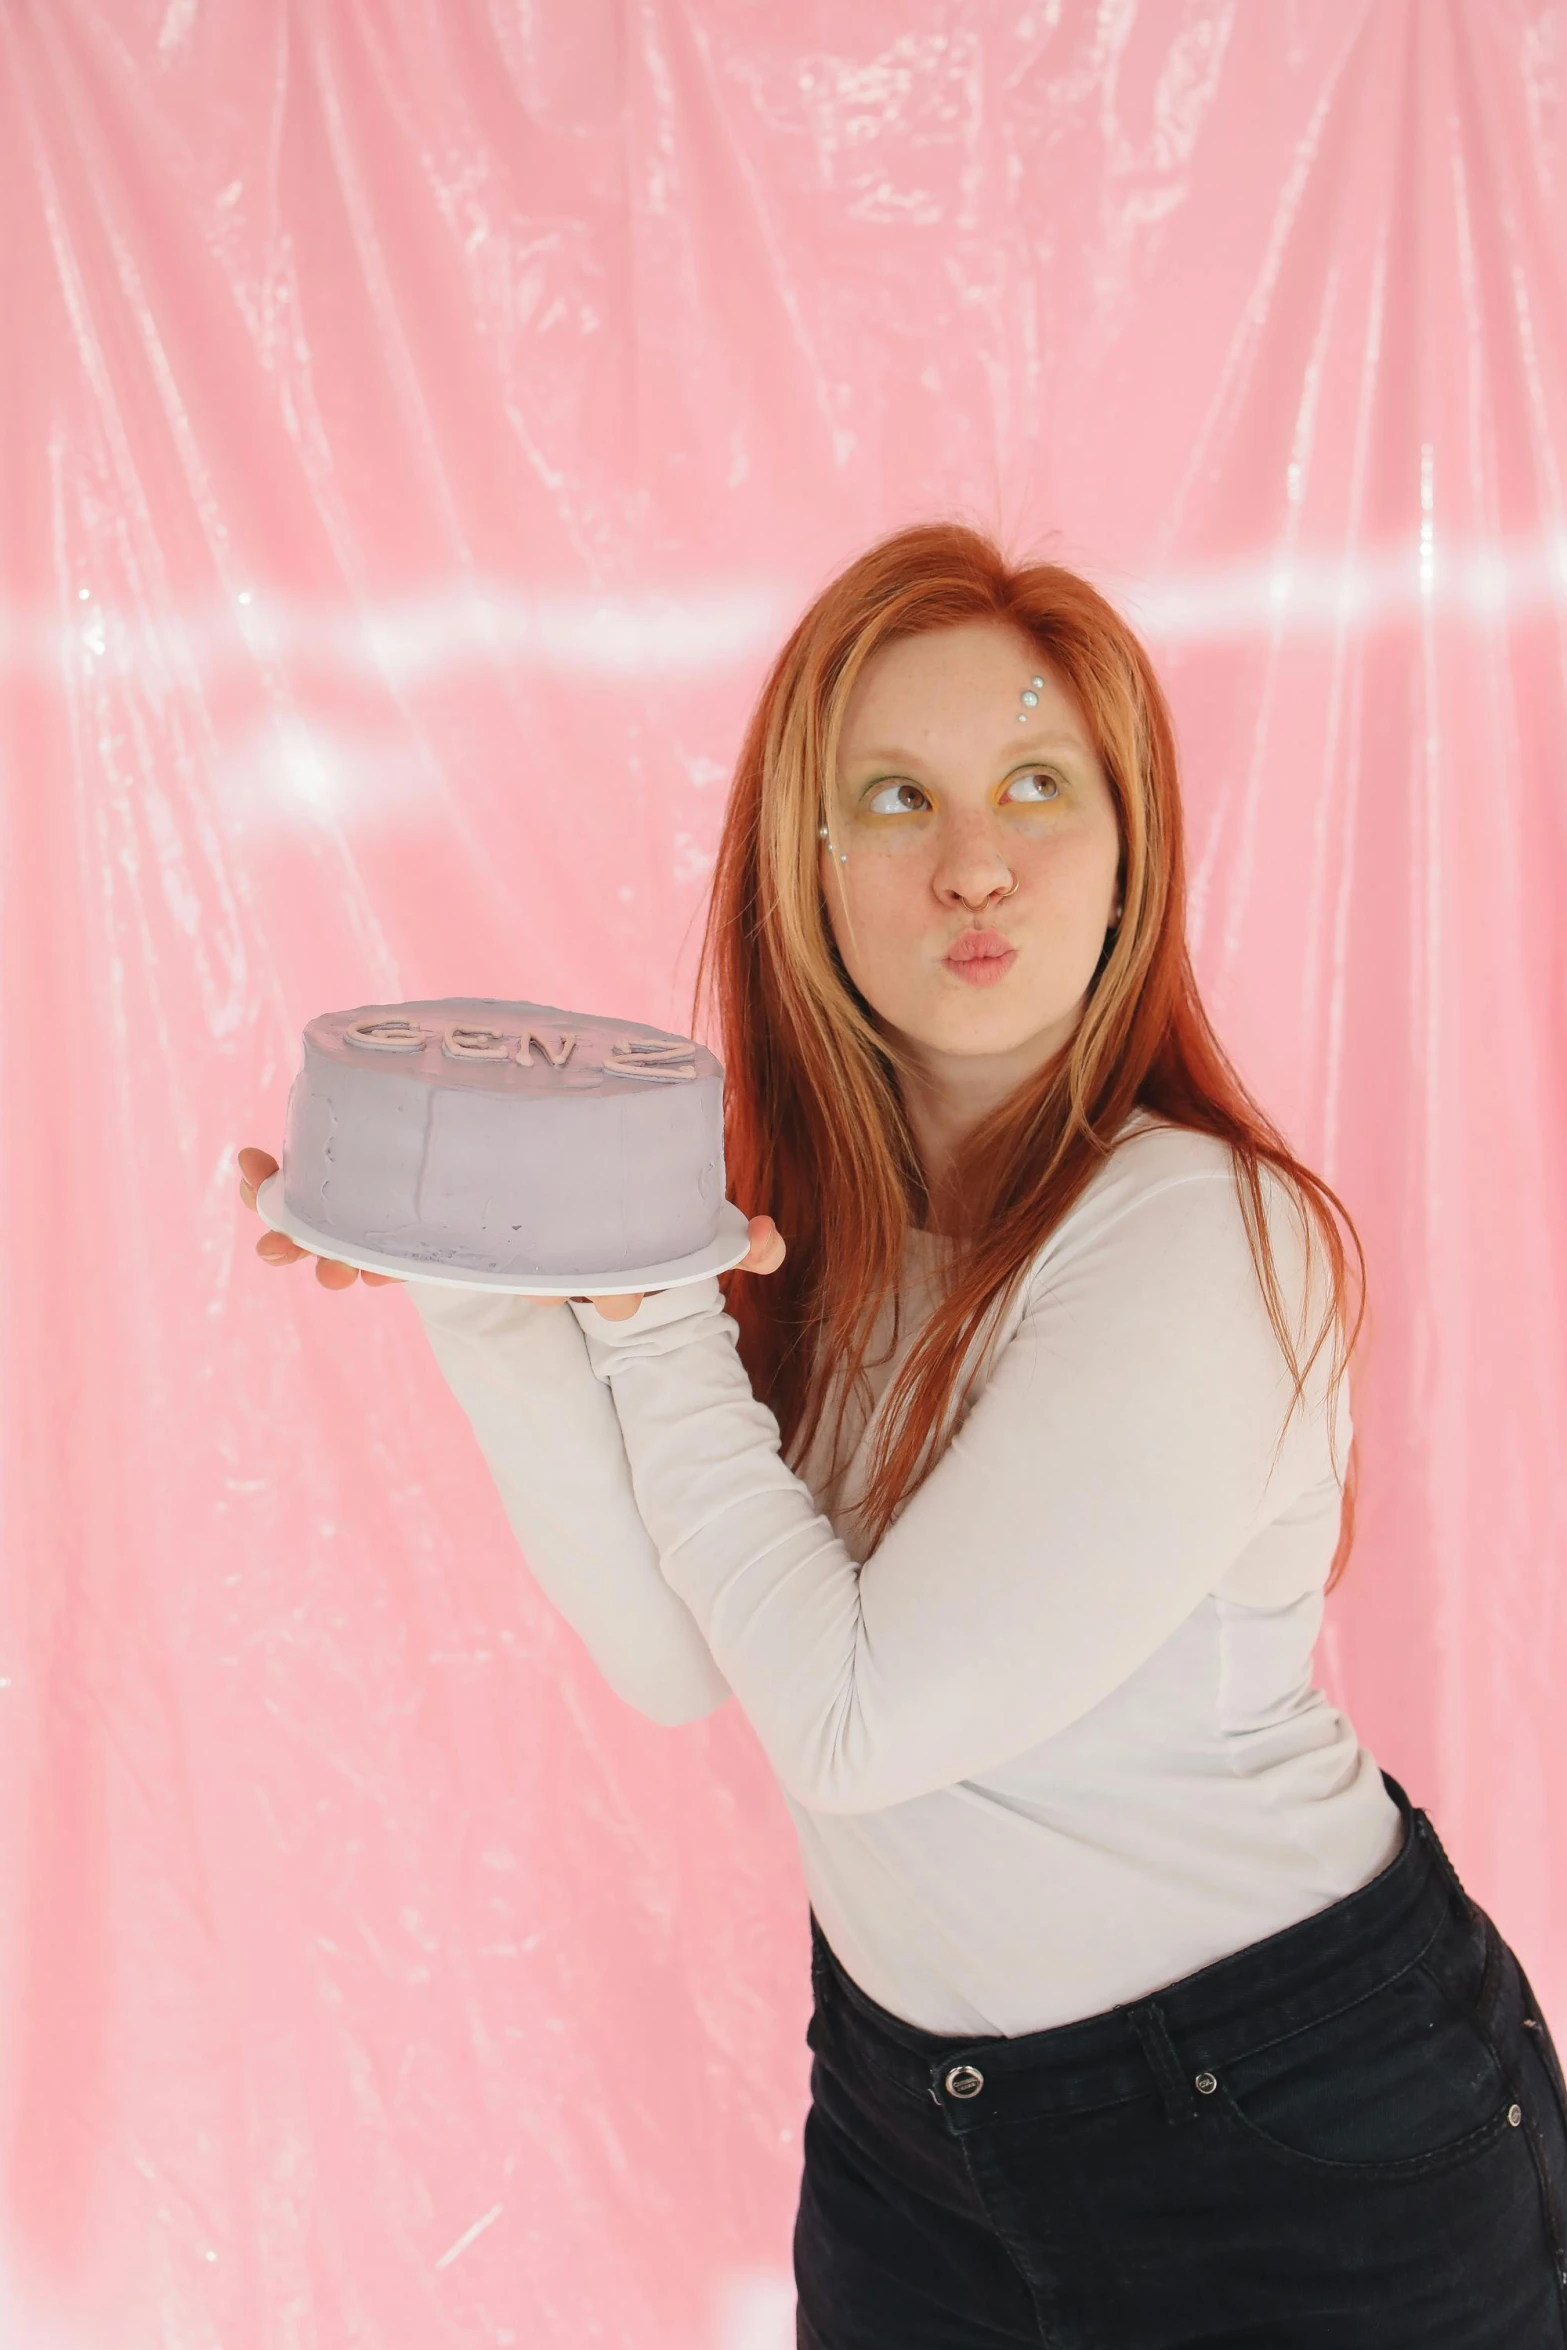 a woman posing holding up a gray cake